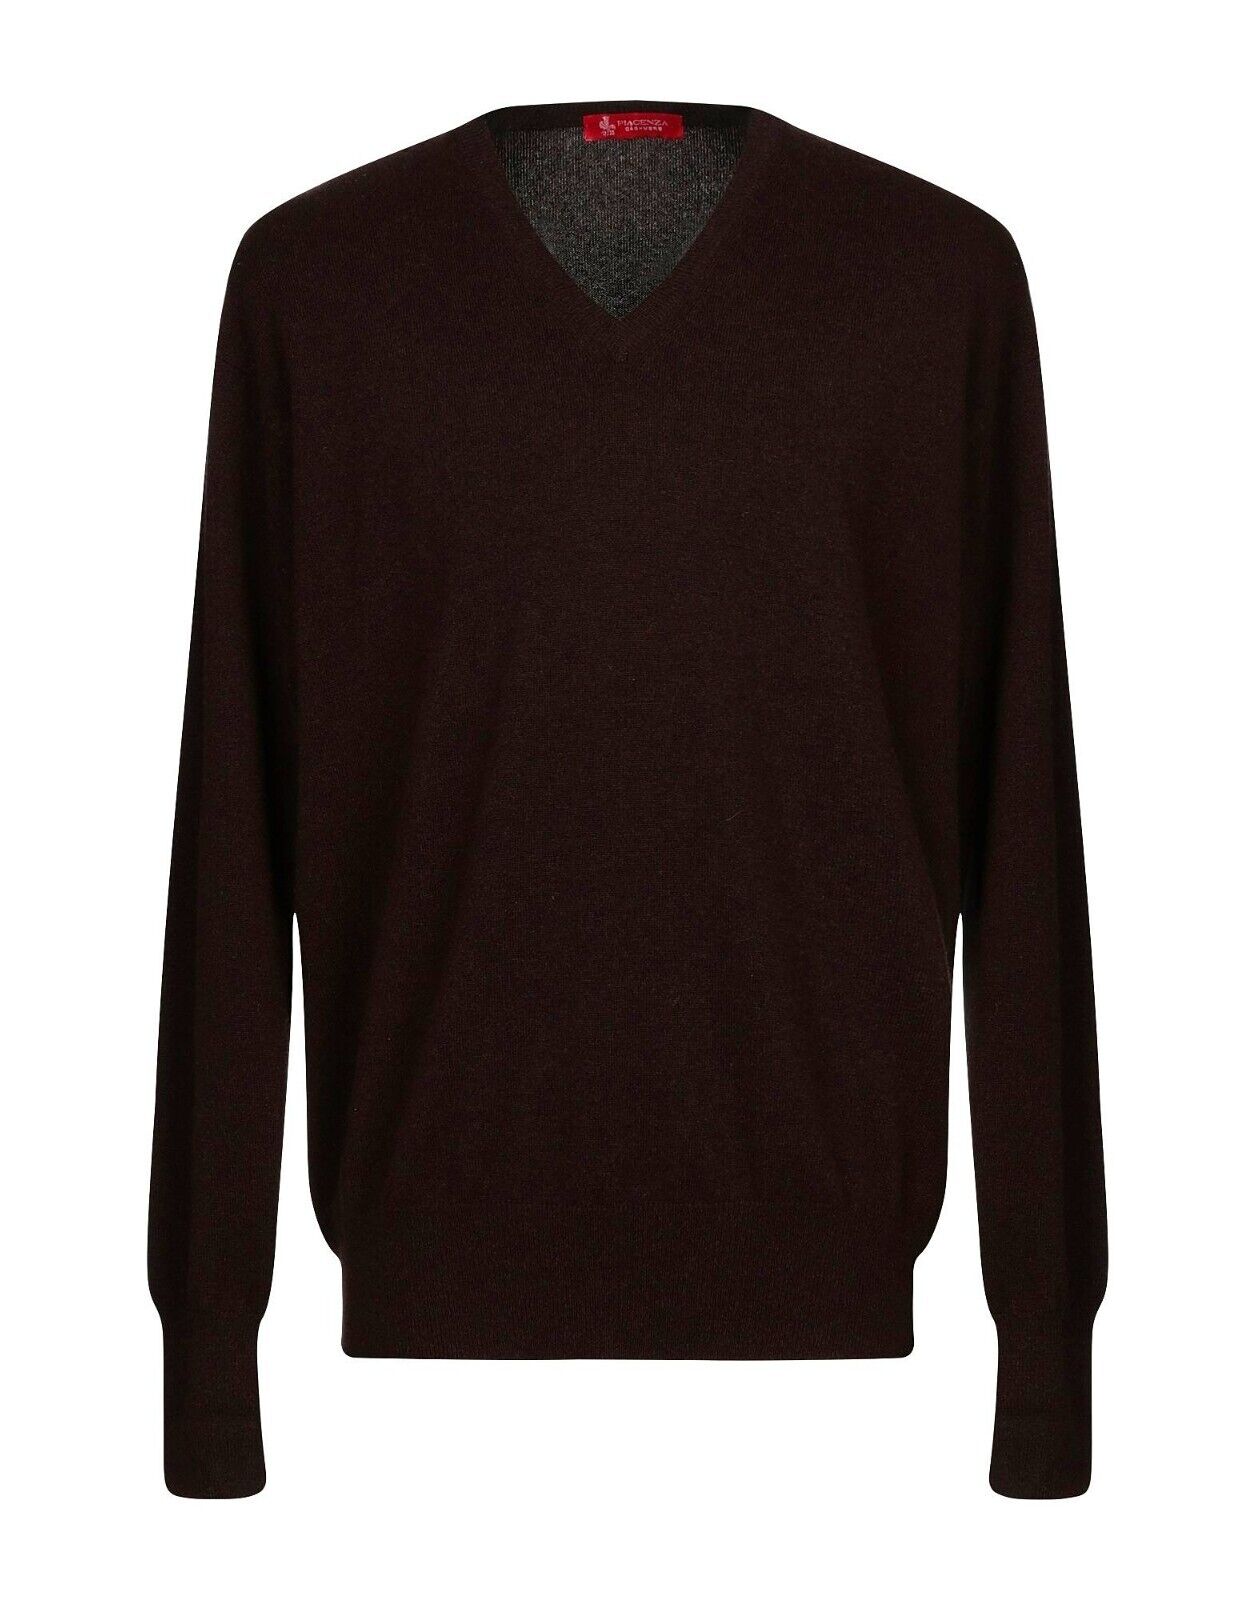 Image of PIACENZA 1733 New Men s Sweater V-Neck Brown Size 58 Pure Cashmere Made in Italy